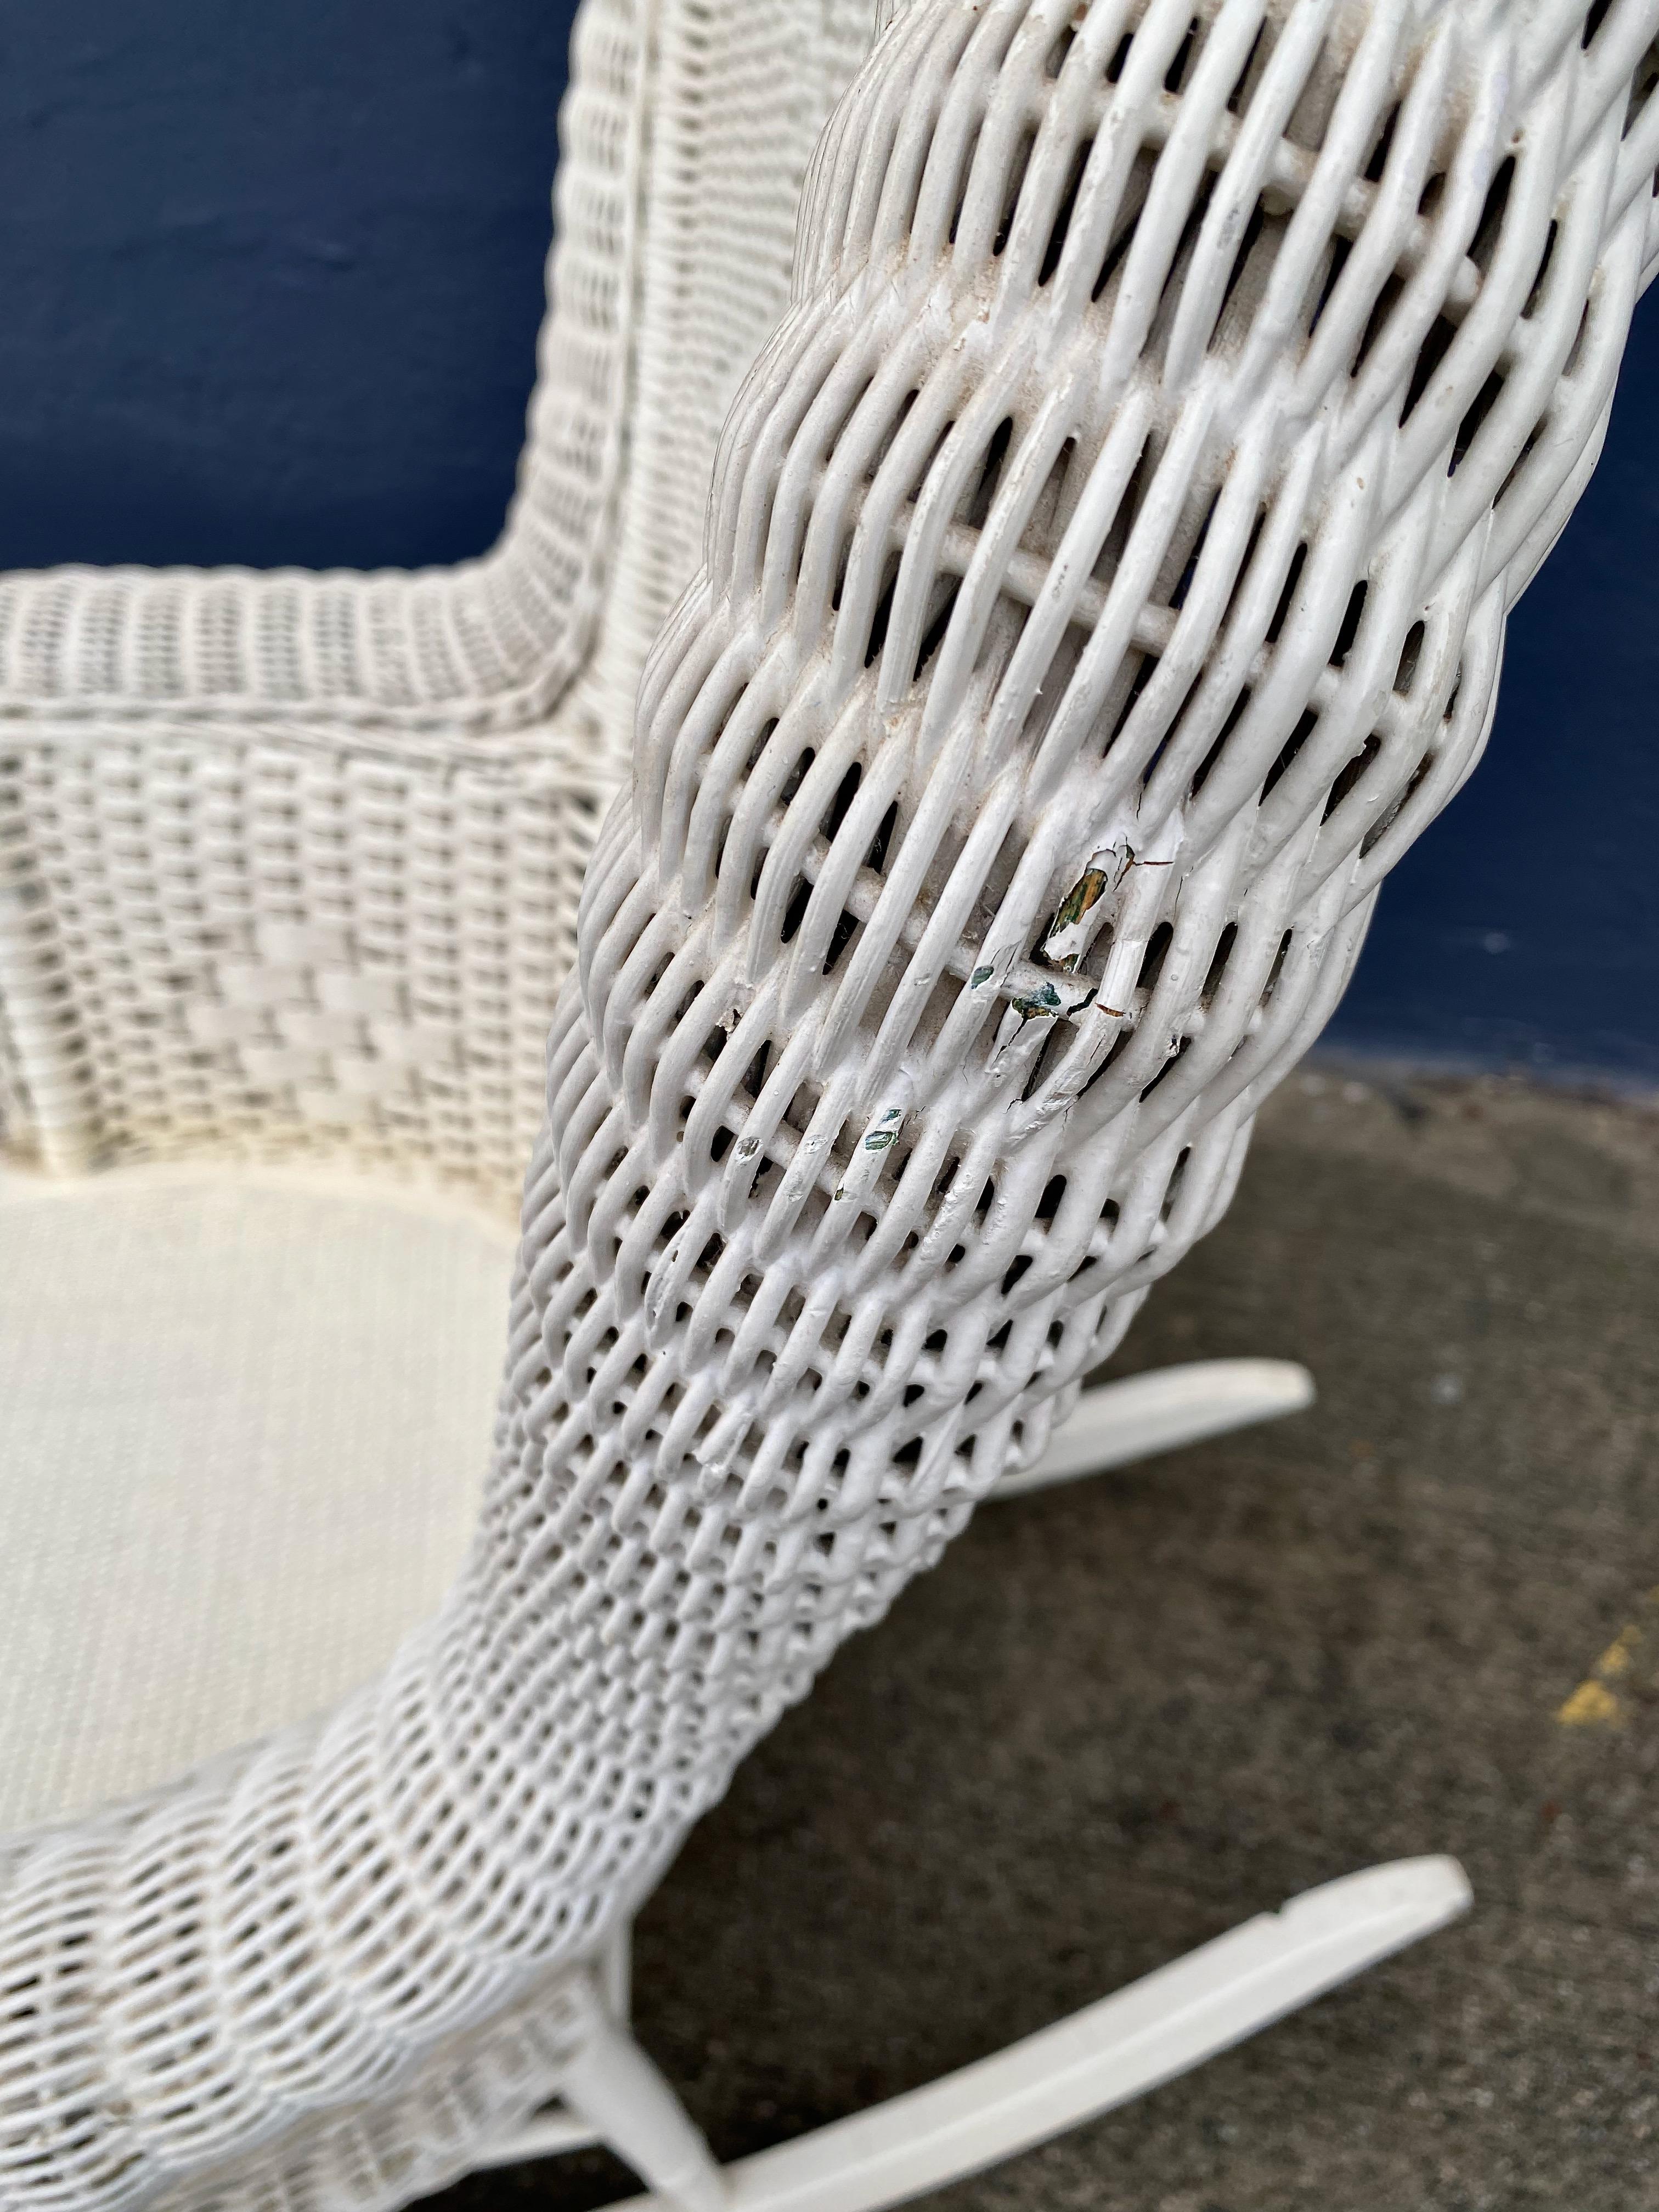 Late 19th Century Victorian Wicker Rocking Chair For Sale